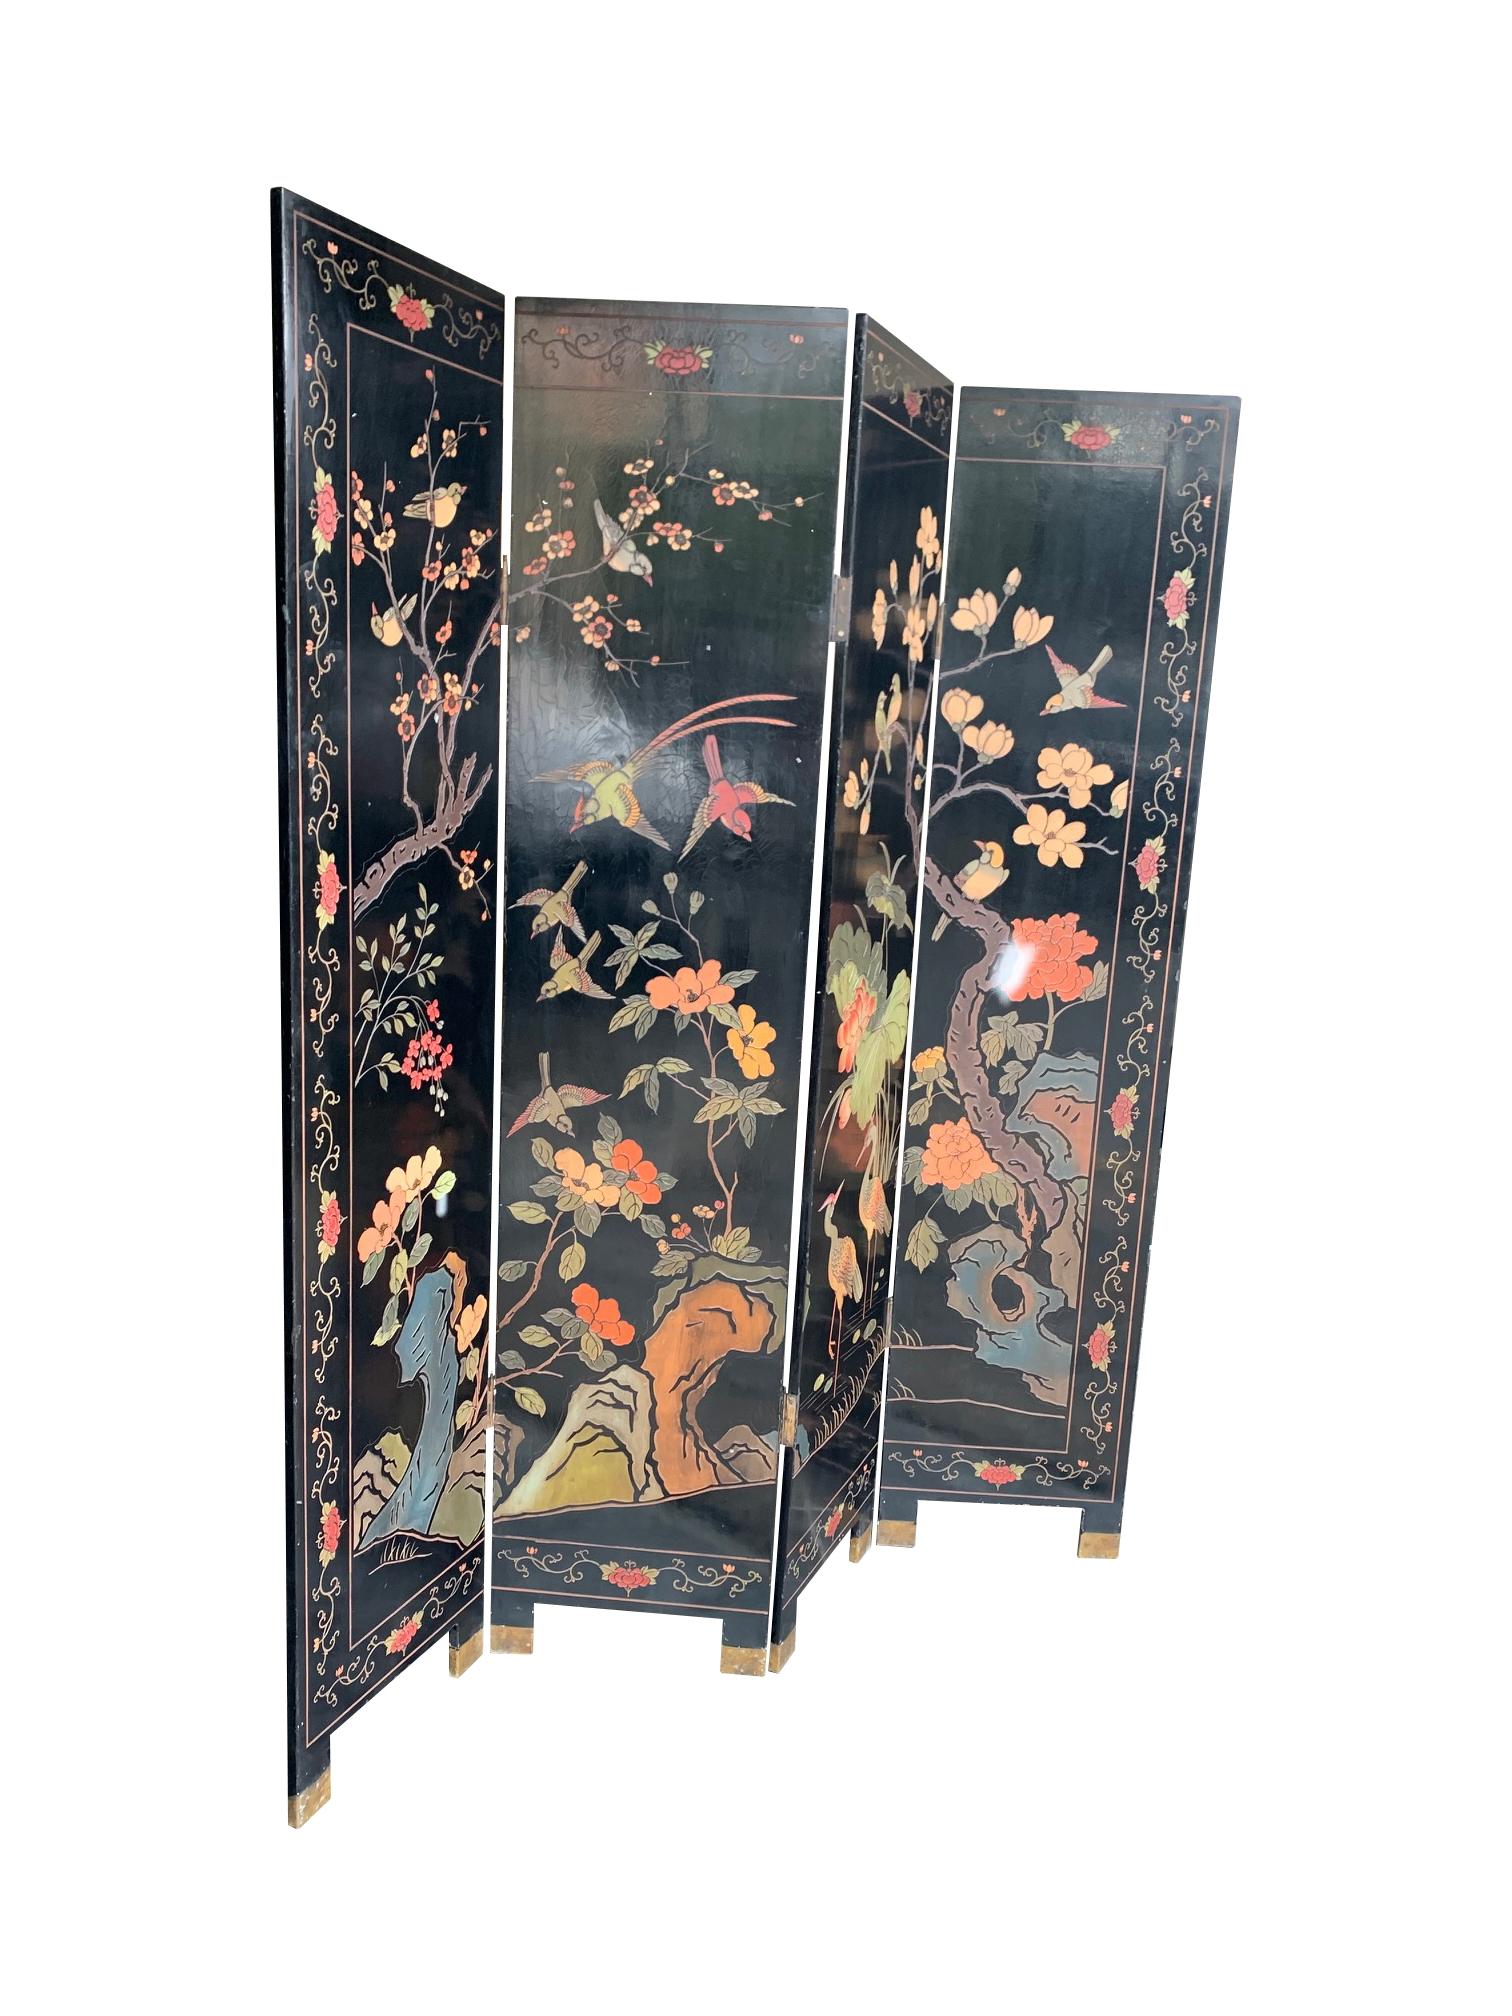 Mini Lacquer Folding Screen Wood Double Sides Chinese Art 18.3"x9.4" New 